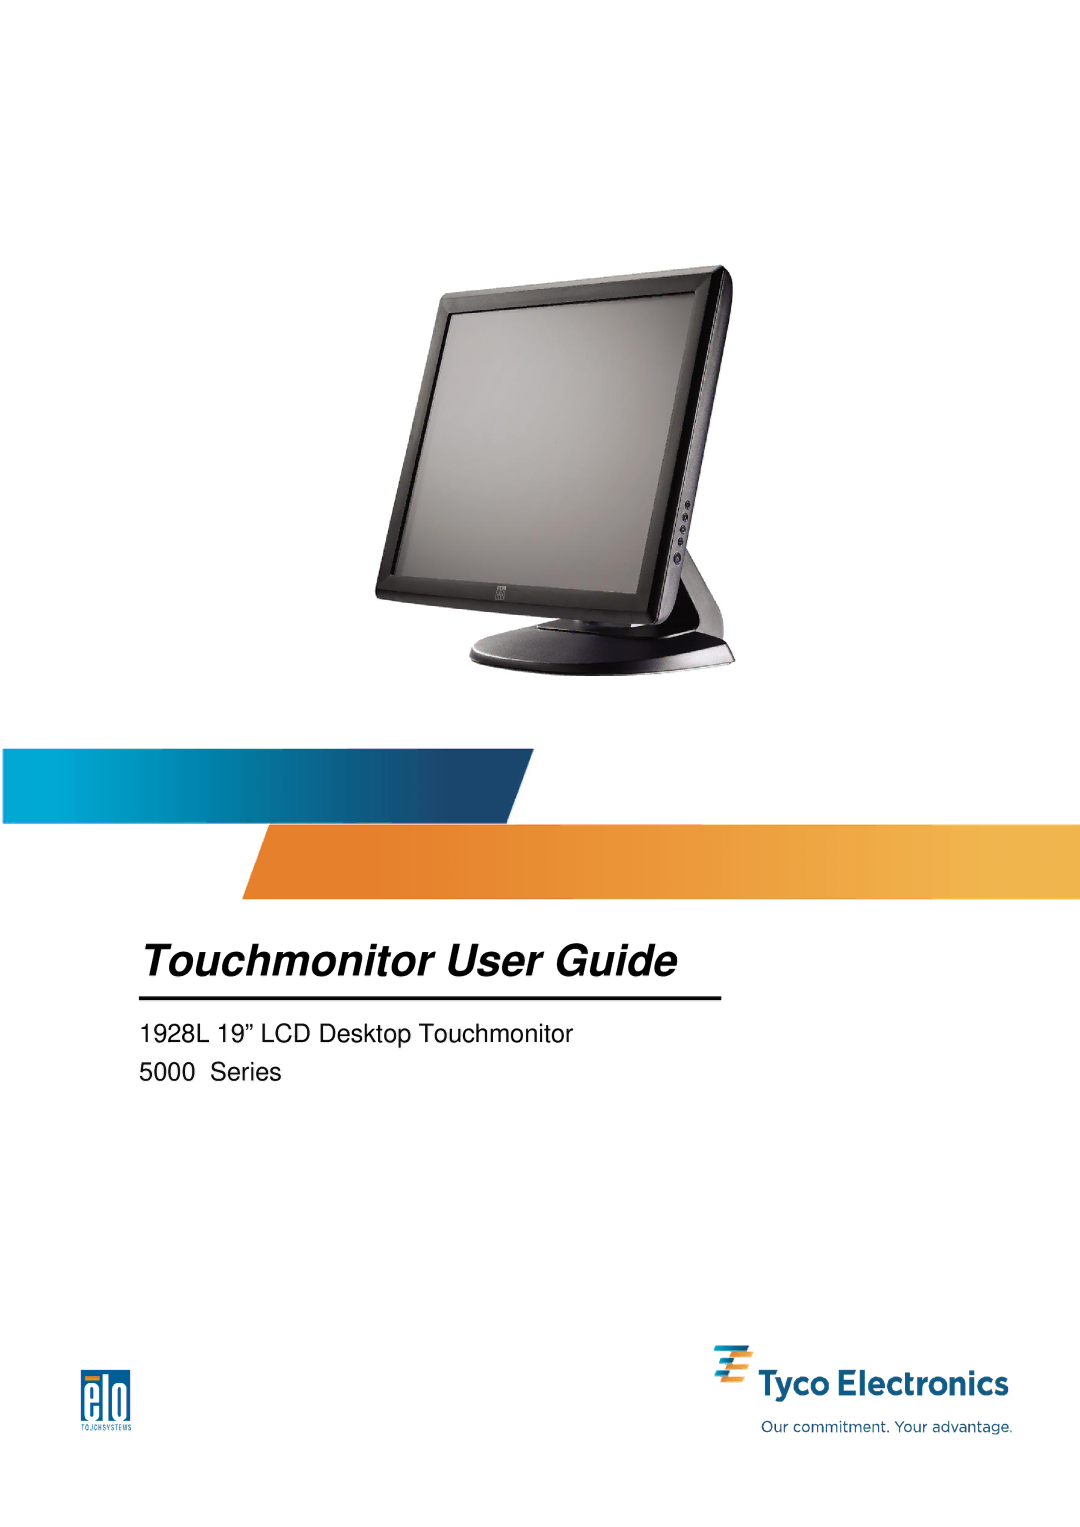 Elo TouchSystems 5000 Series, E791522 manual Touchmonitor User Guide 